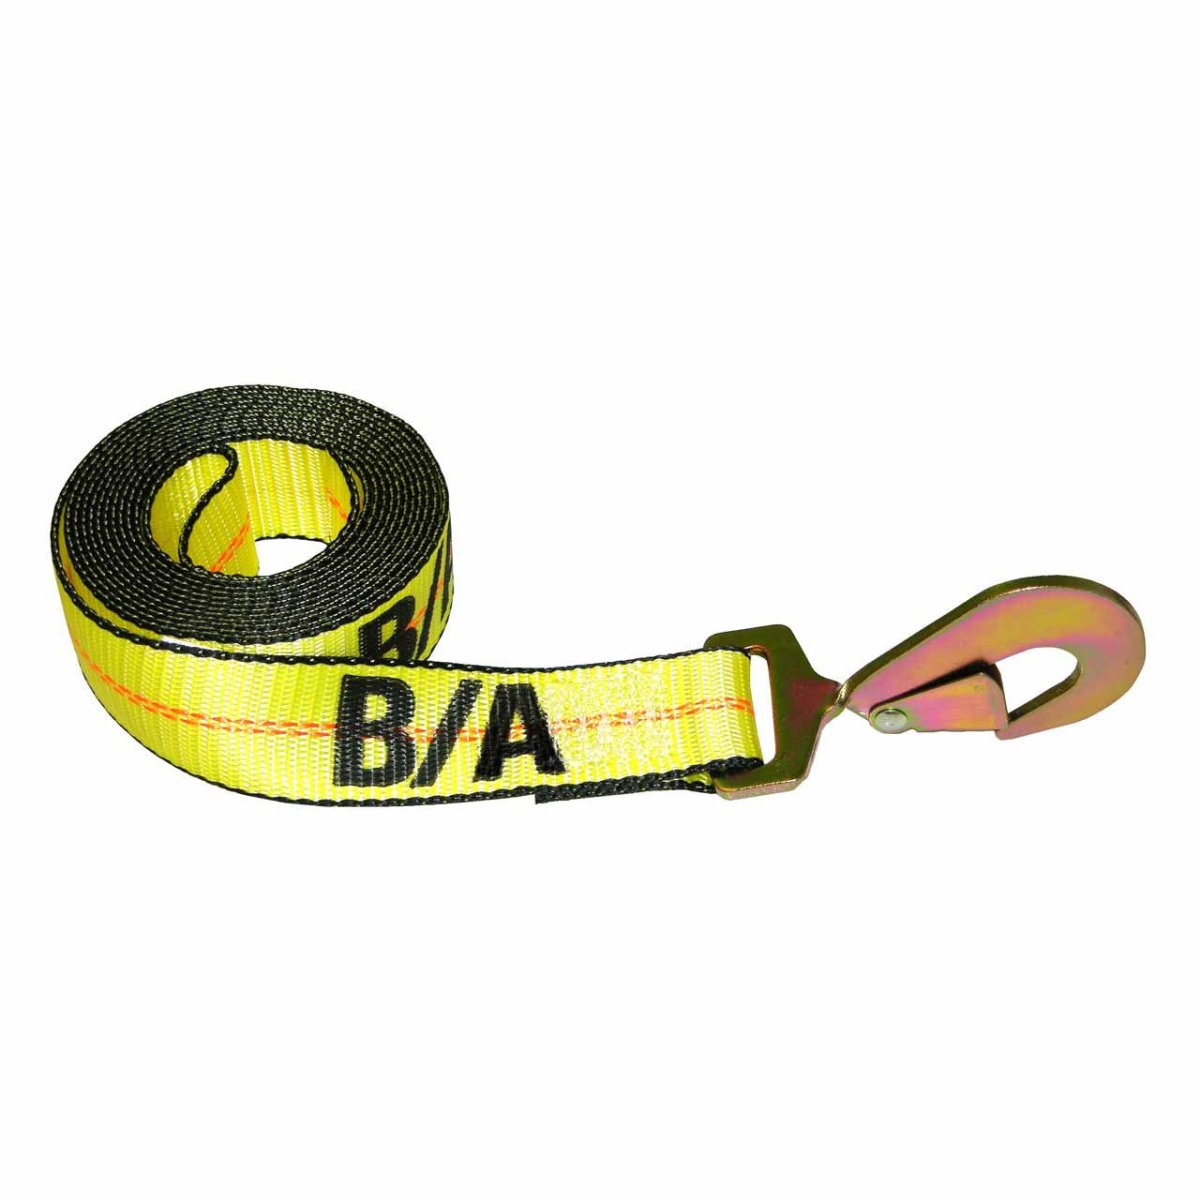 B/A Products Co. 2" x 14' Snap Hook Strap - 38-200-L - starequipmentsales